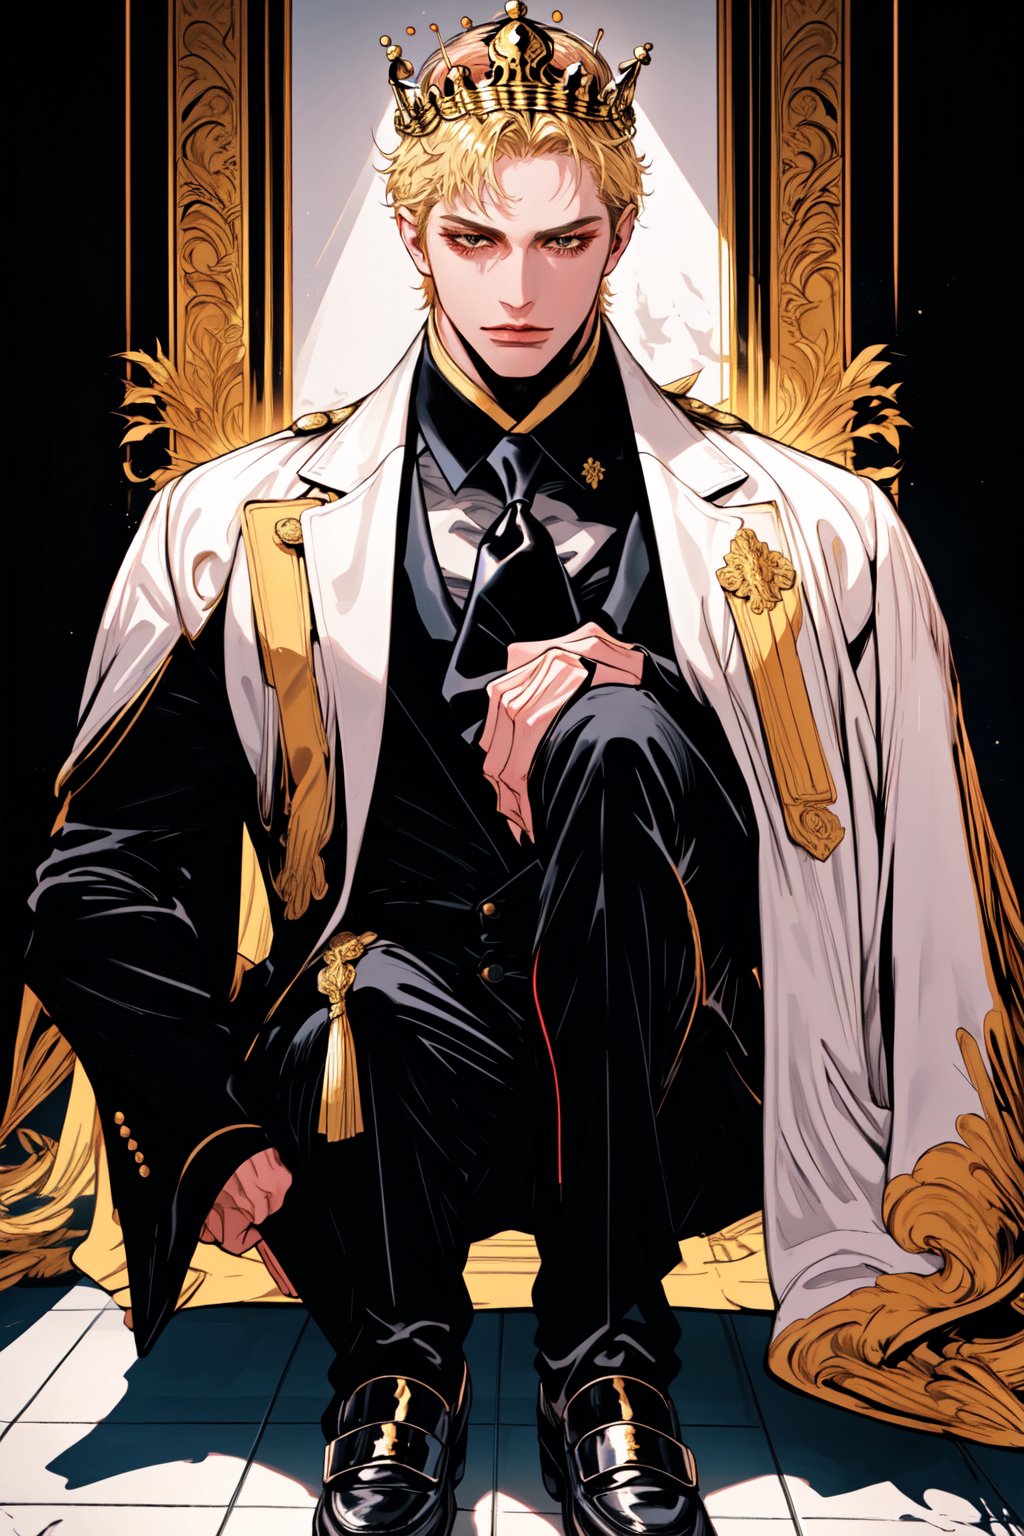 Man with a large golden crown on his head,
Serious and firm expression
Dressed in a suit and white tie
Looking at the floor 
,Dark king, sentado em um trono do rei 